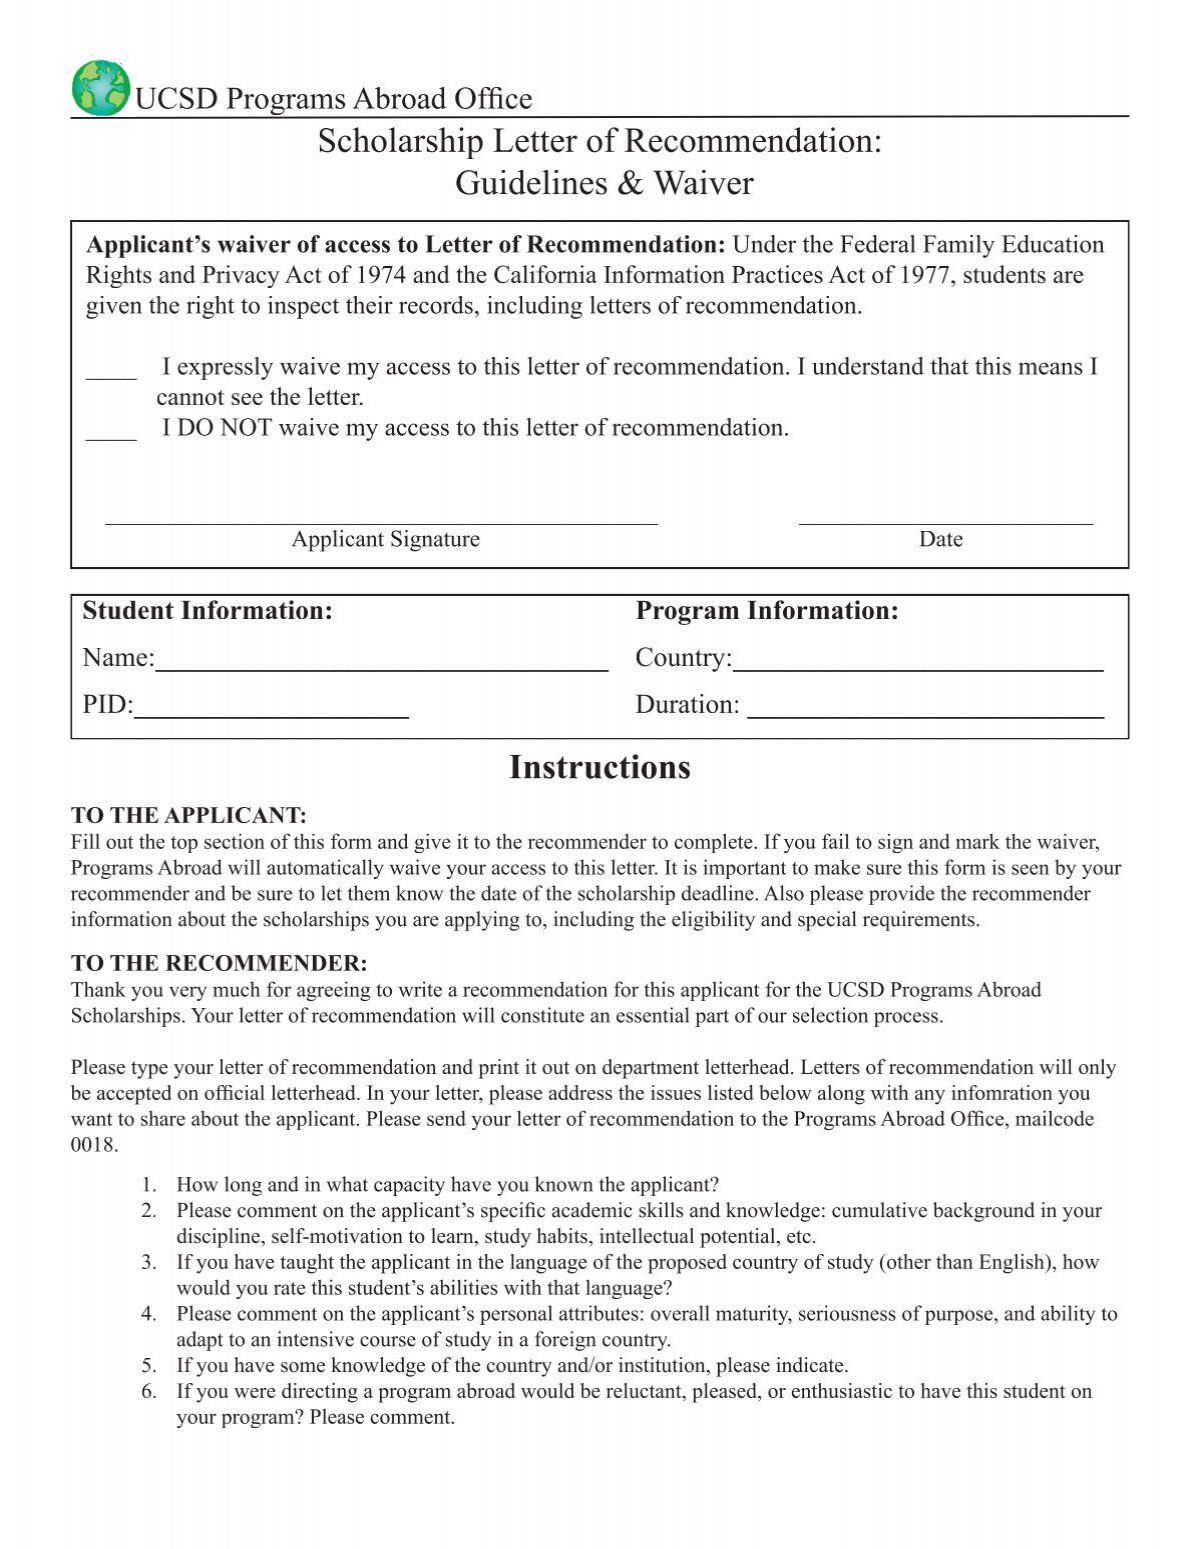 Scholarship Letter Of Recommendation Programs Abroad Office